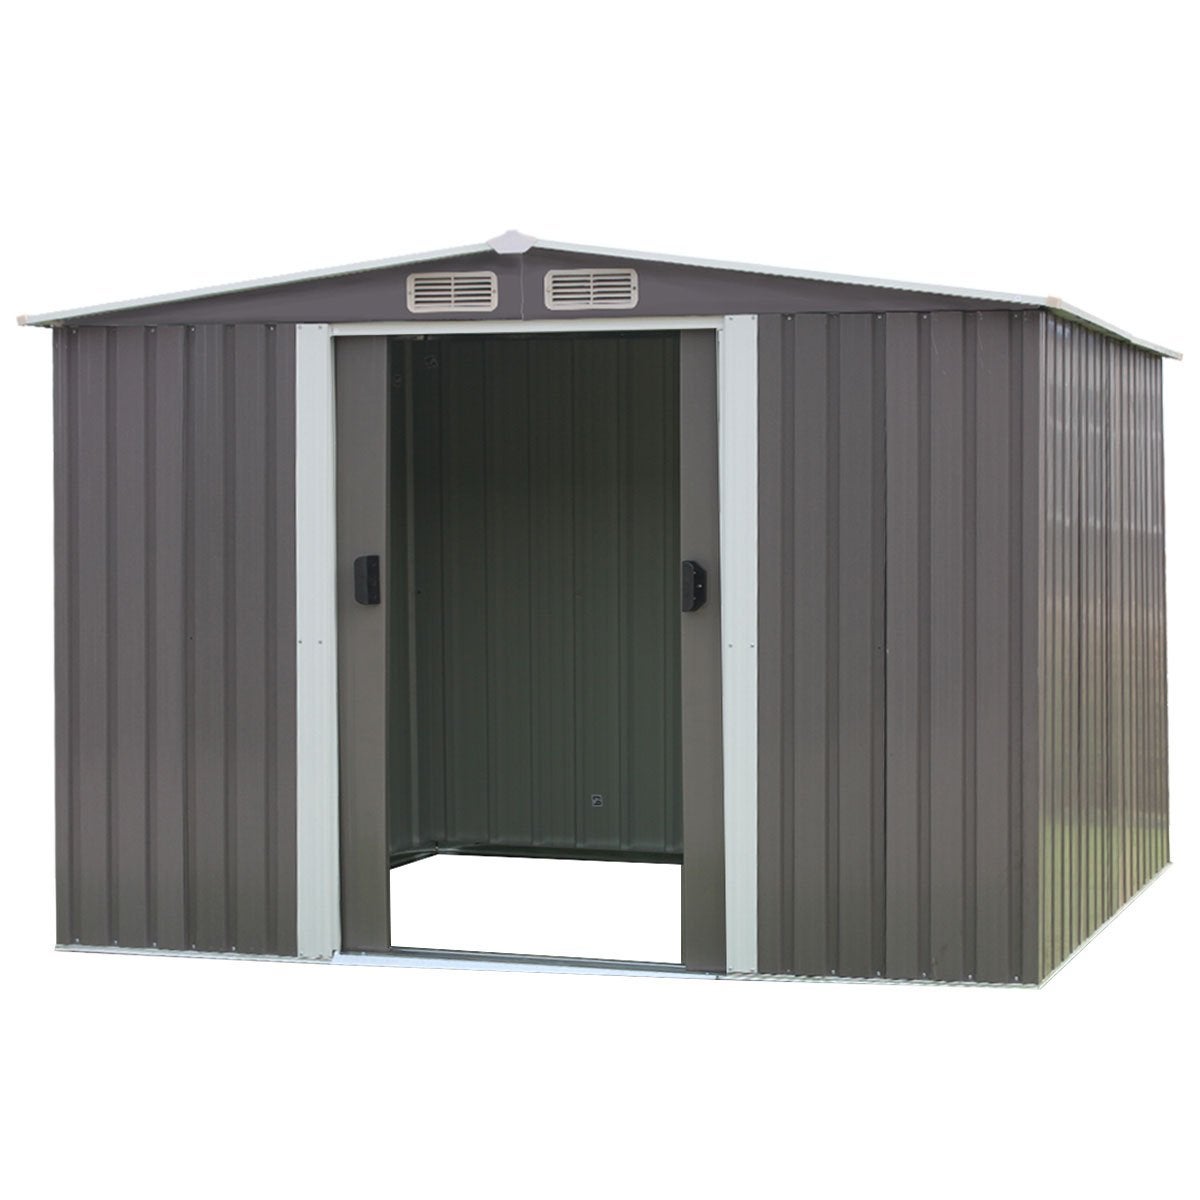 8ft x 8ft Garden Shed Spire Roof Outdoor Storage Shelter - Grey